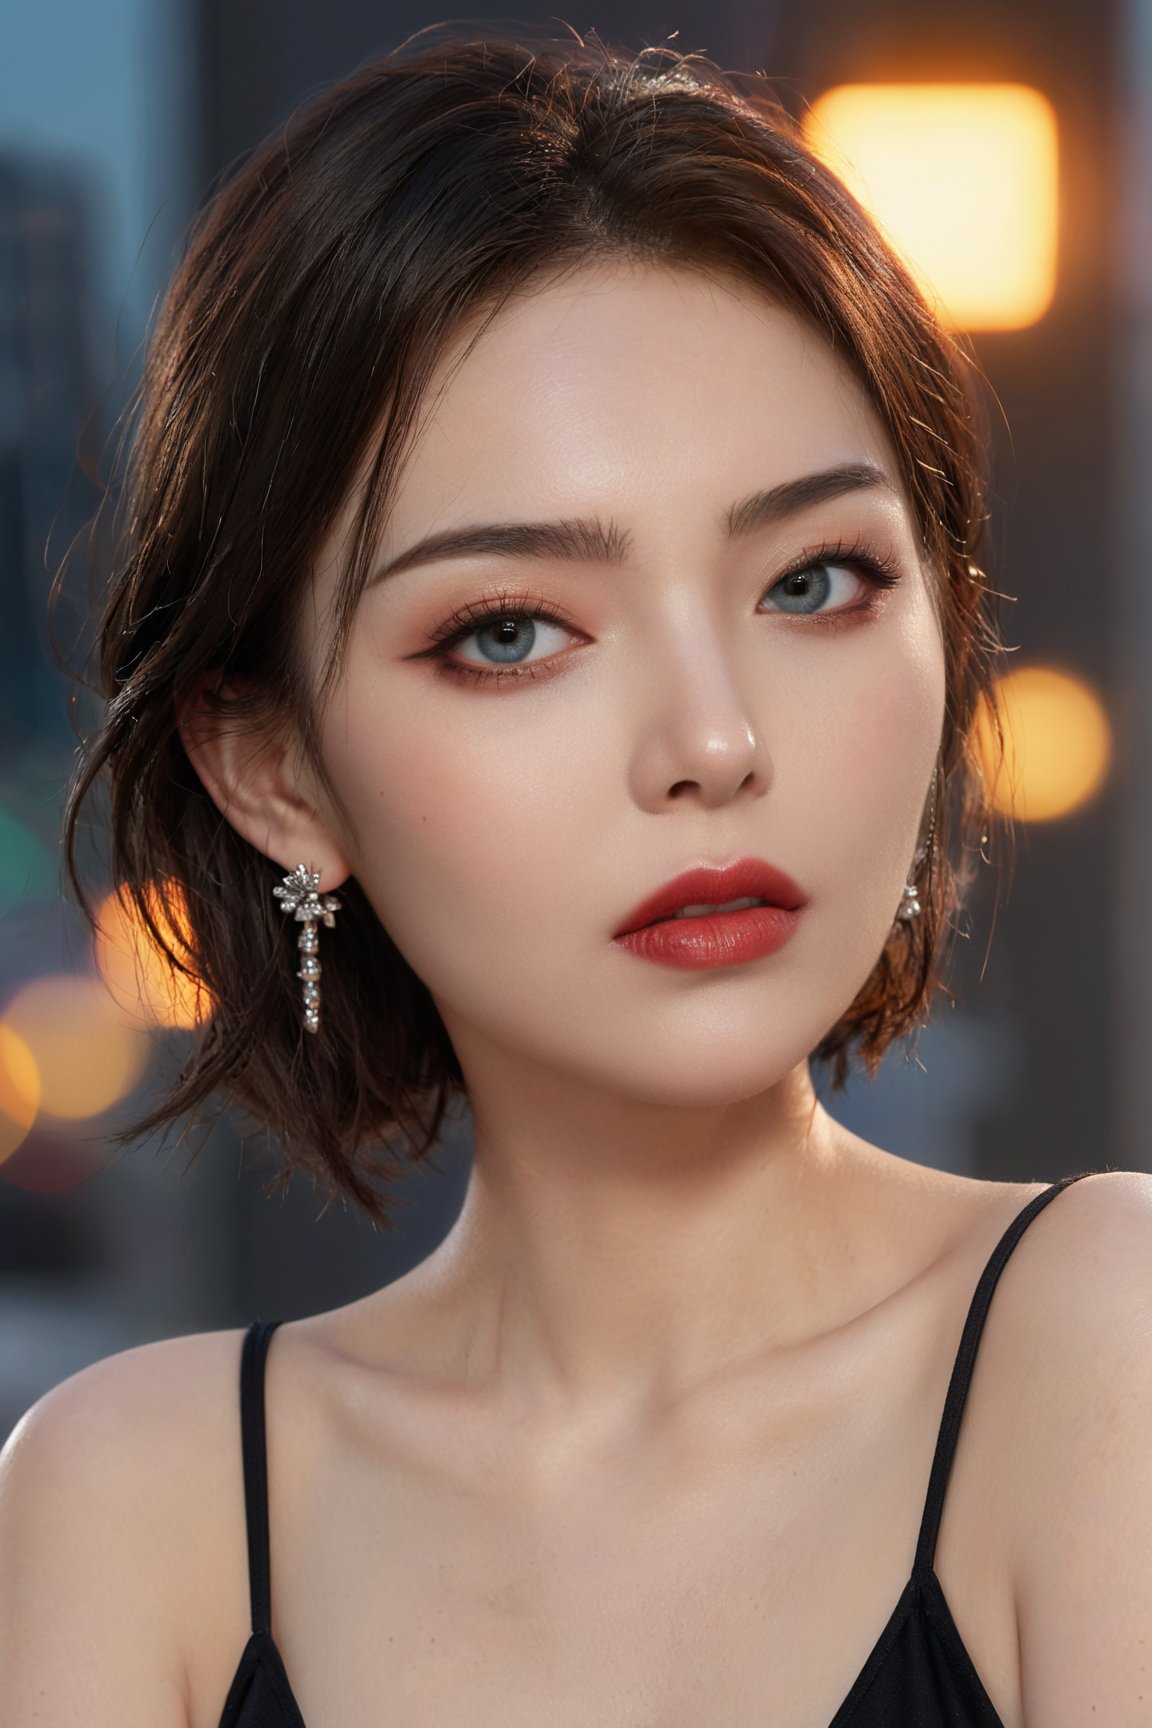 (best quality,4k,8k,highres,masterpiece:1.2),ultra-detailed,(realistic,photorealistic,photo-realistic:1.37),portraits,short hair, intense gaze, beautiful detailed eyes and lips, porcelain skin, elegant posture, high fashion dress, stiletto heels, urban setting, vibrant city lights, neon signs, exciting nightlife, confident expression, attractive curves, mesmerizing makeup, dark background, alluring atmosphere, fashionable accessories, stylish earrings, glossy lips, sultry atmosphere, radiant complexion, seductive charm, sleek and modern, urban chic, fashionable hairstyle, sophisticated makeup, expressive eyes, captivating appearance, glamorous and confident.